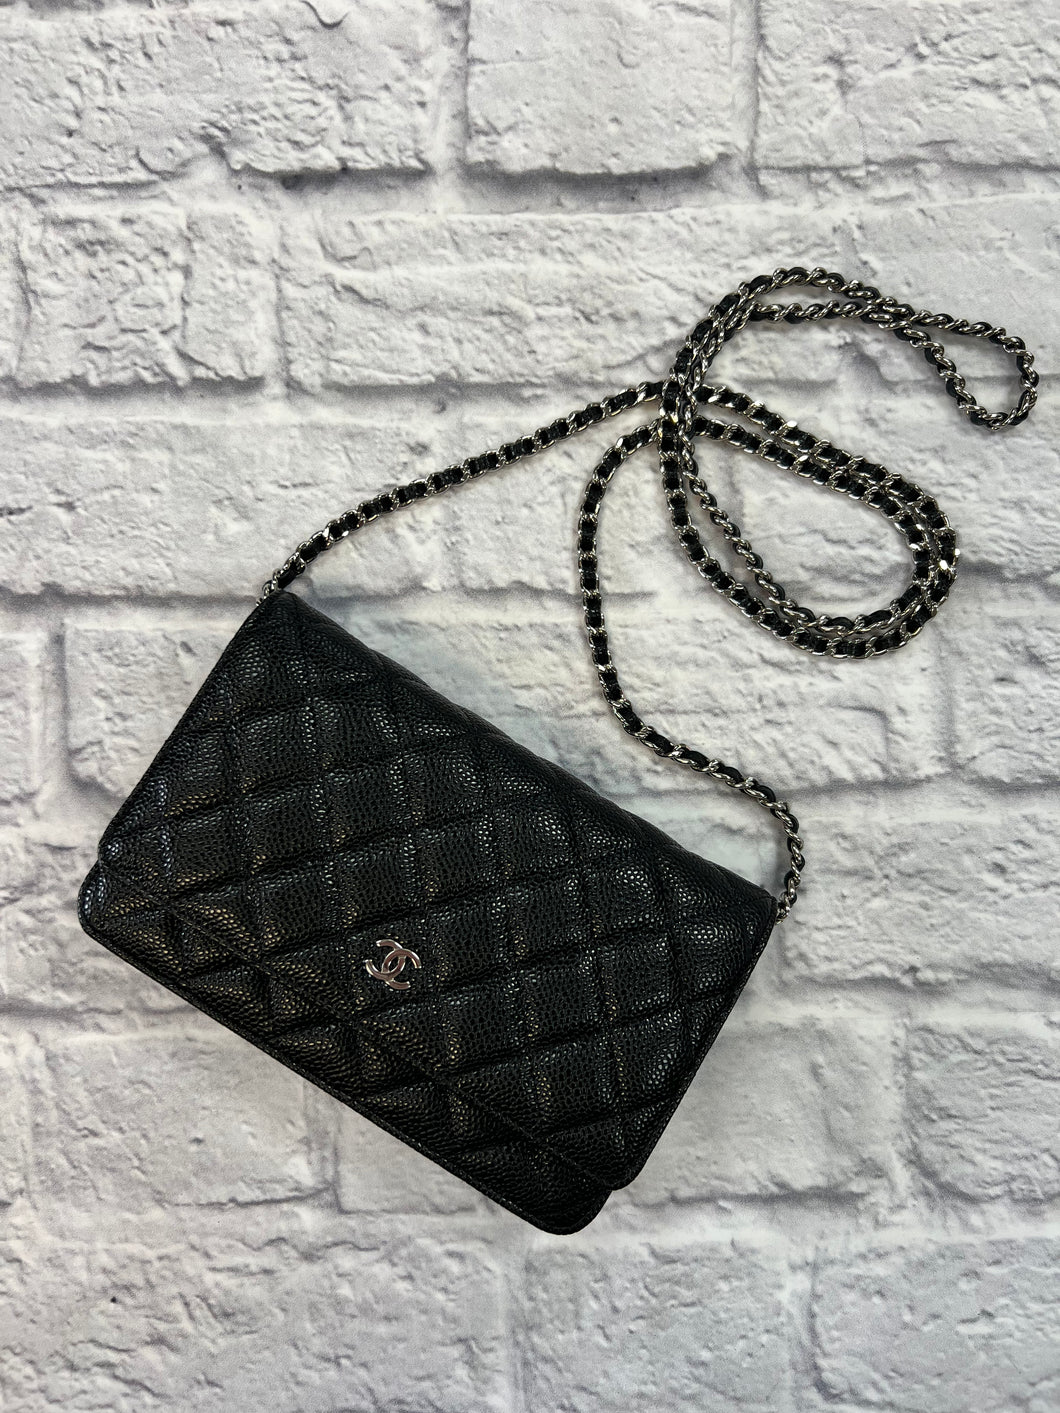 CHANEL Caviar Quilted Wallet on Chain WOC Black 1303693